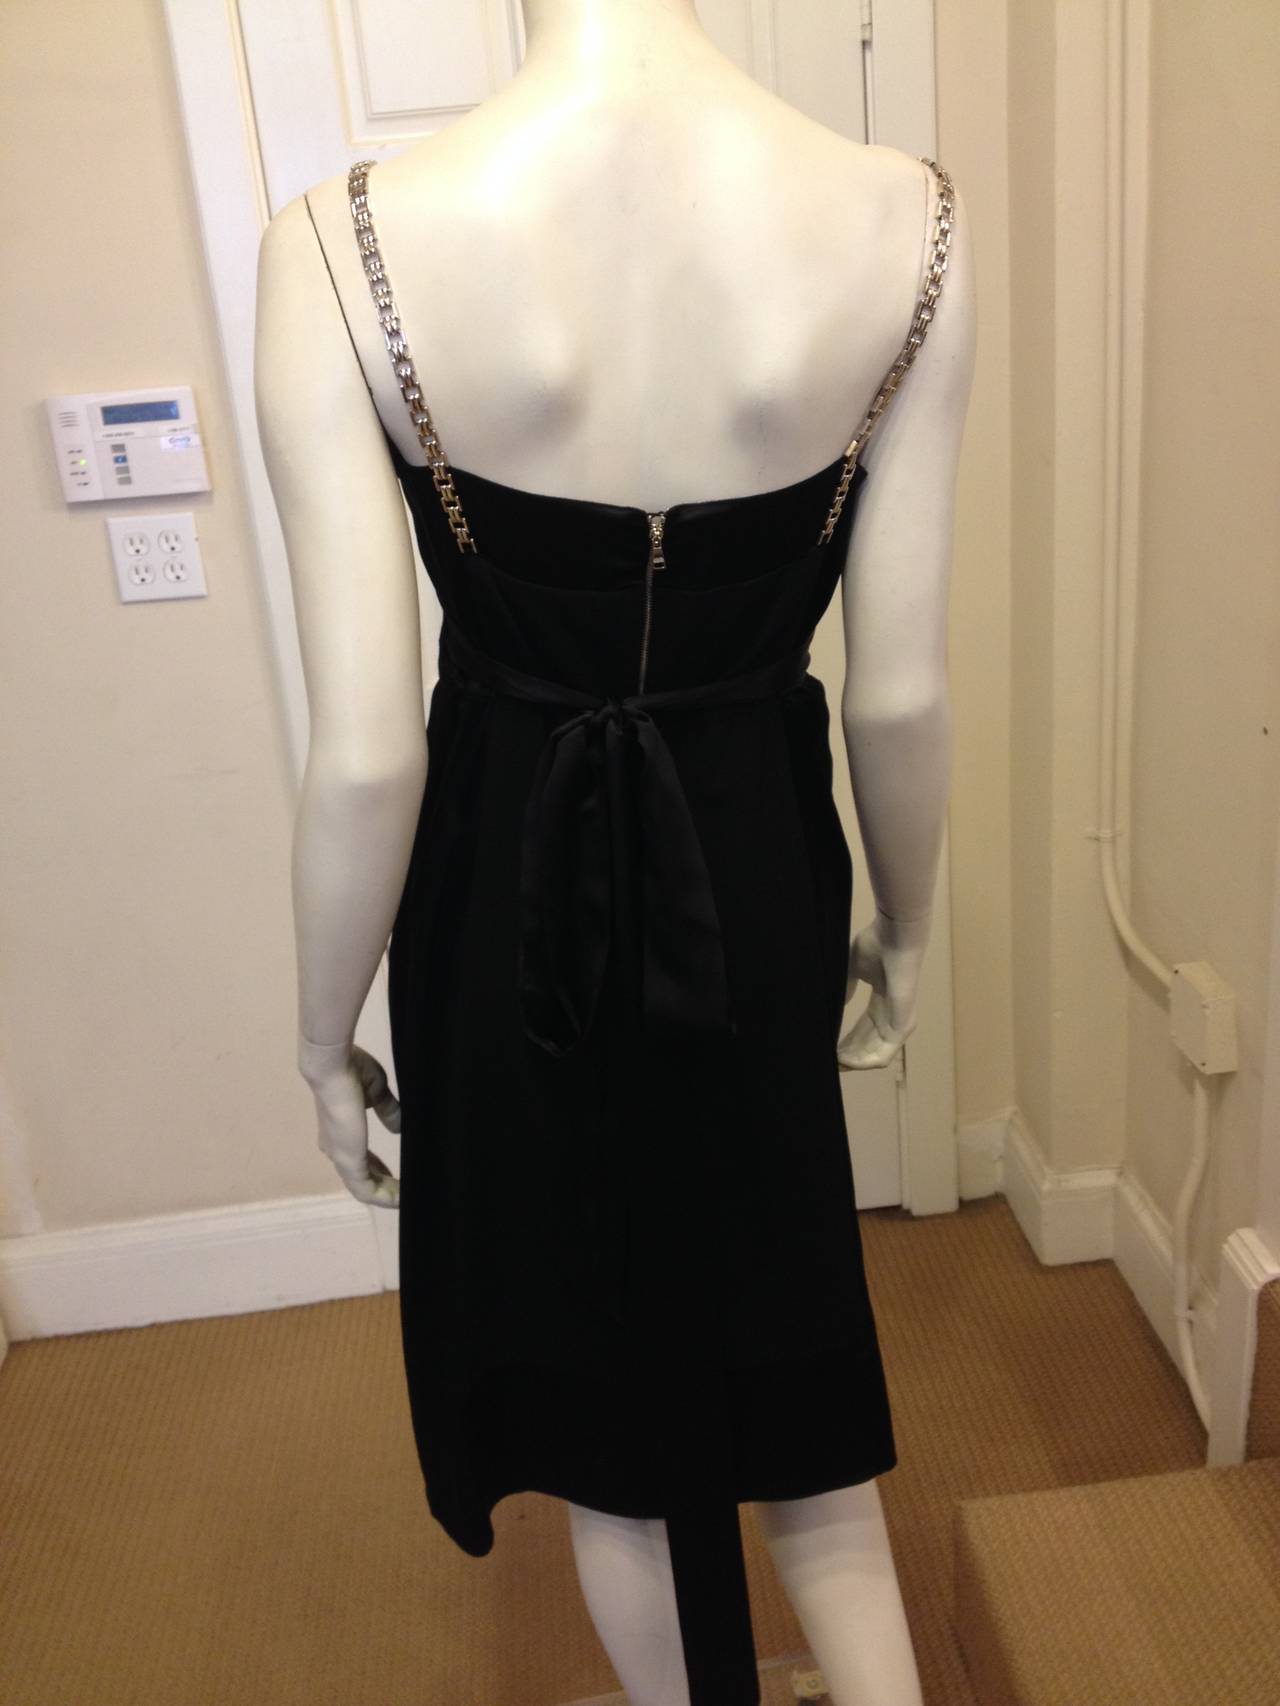 black dress with chain straps